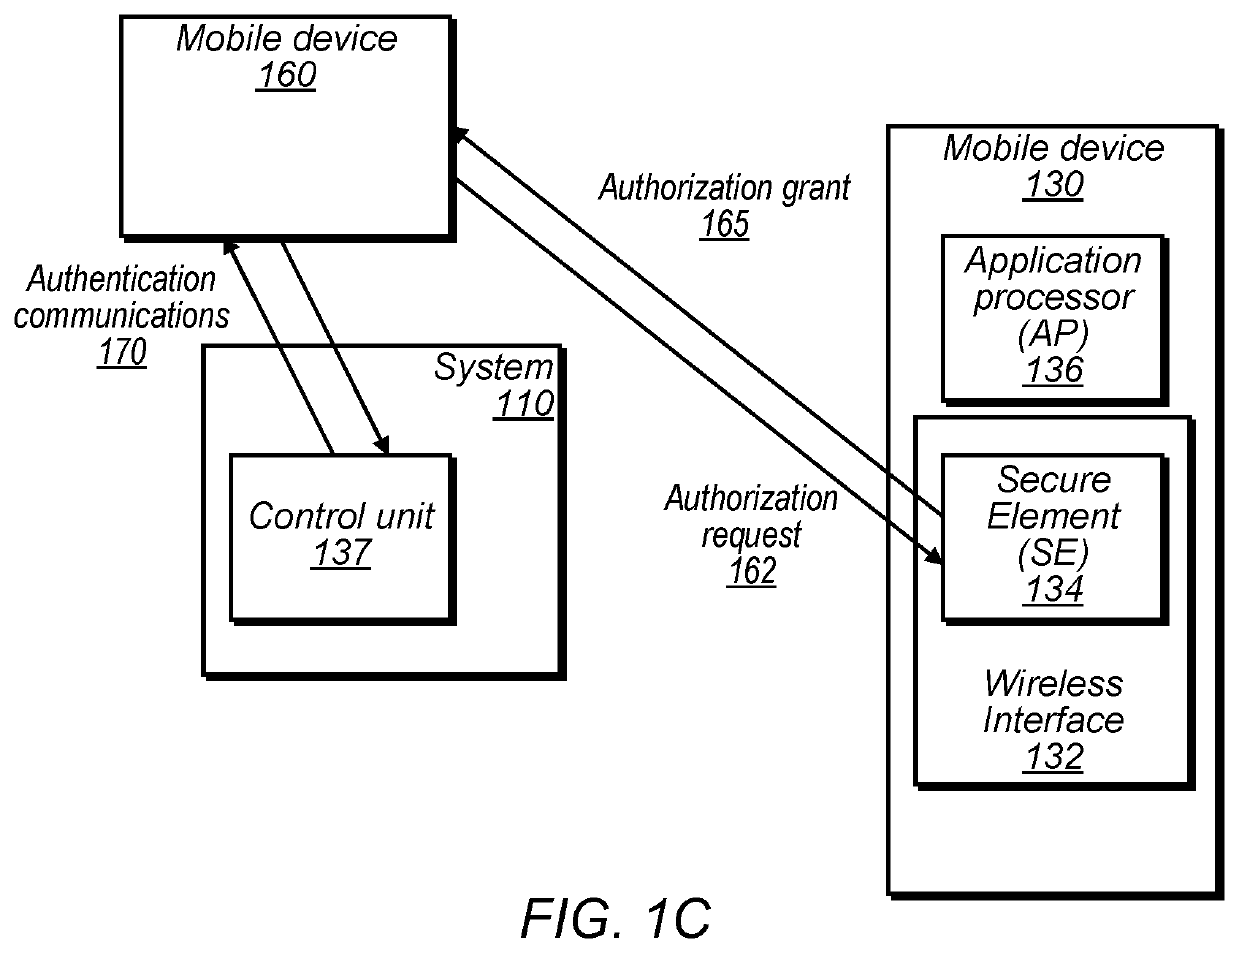 System access using a mobile device